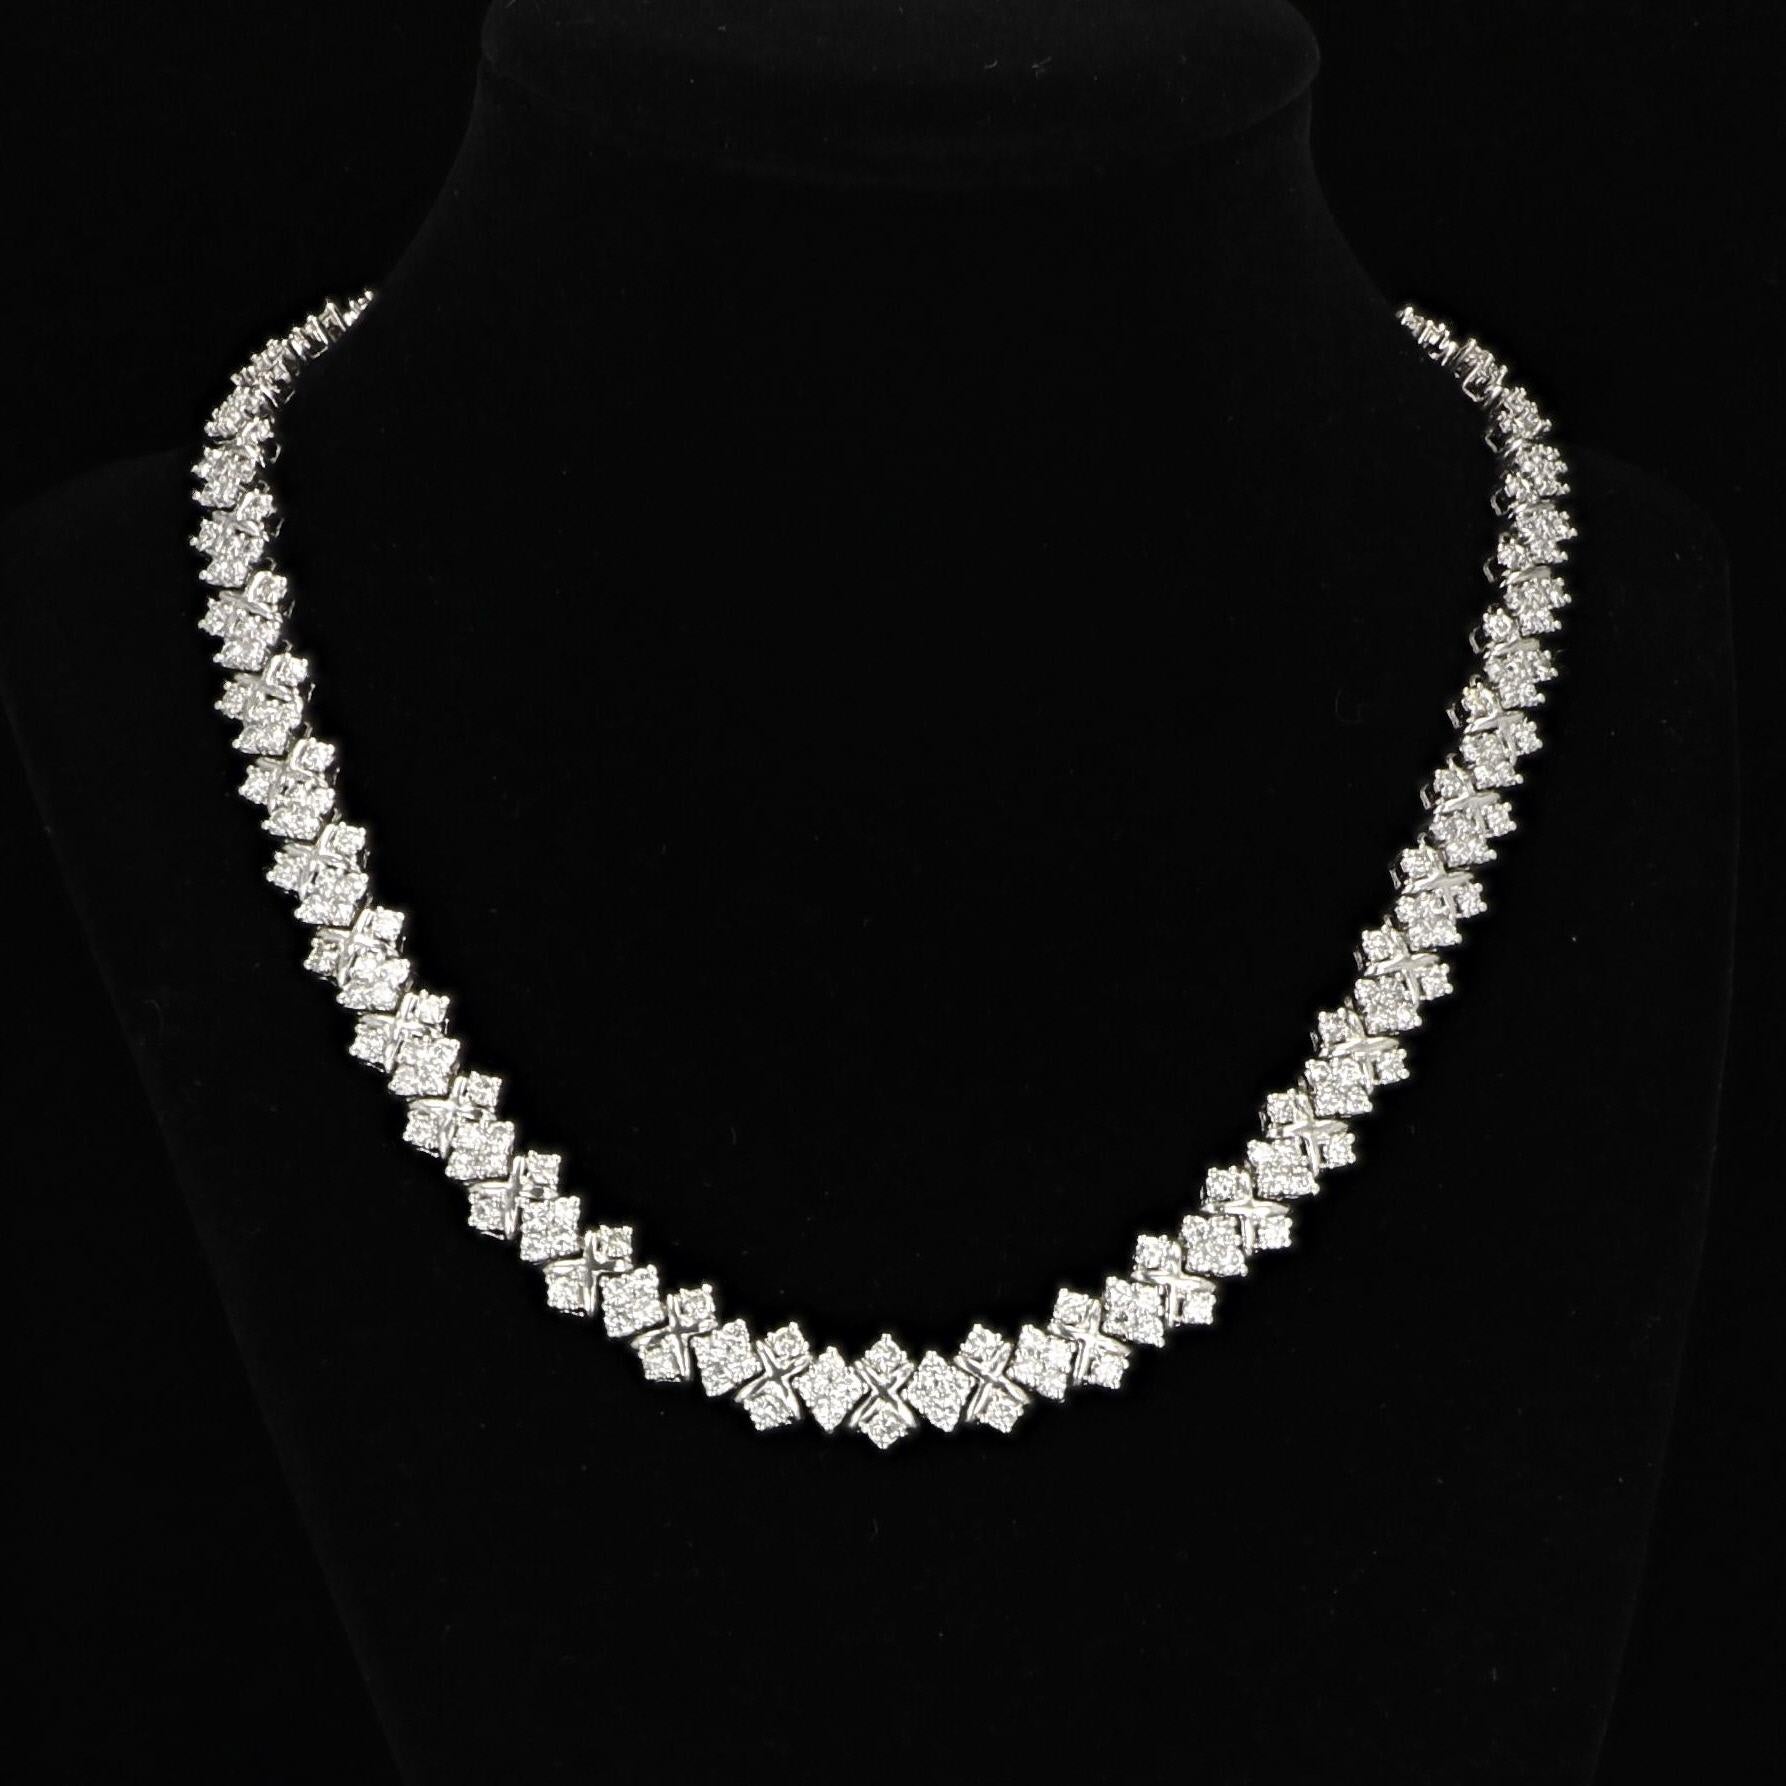 This 18k white gold diamond link necklace is set with approximately 269 round brilliant diamonds together weighing approximately 18.00 carats. The diamonds have average color of G-H and average clarity of SI1. The necklace measures 10mm in width by